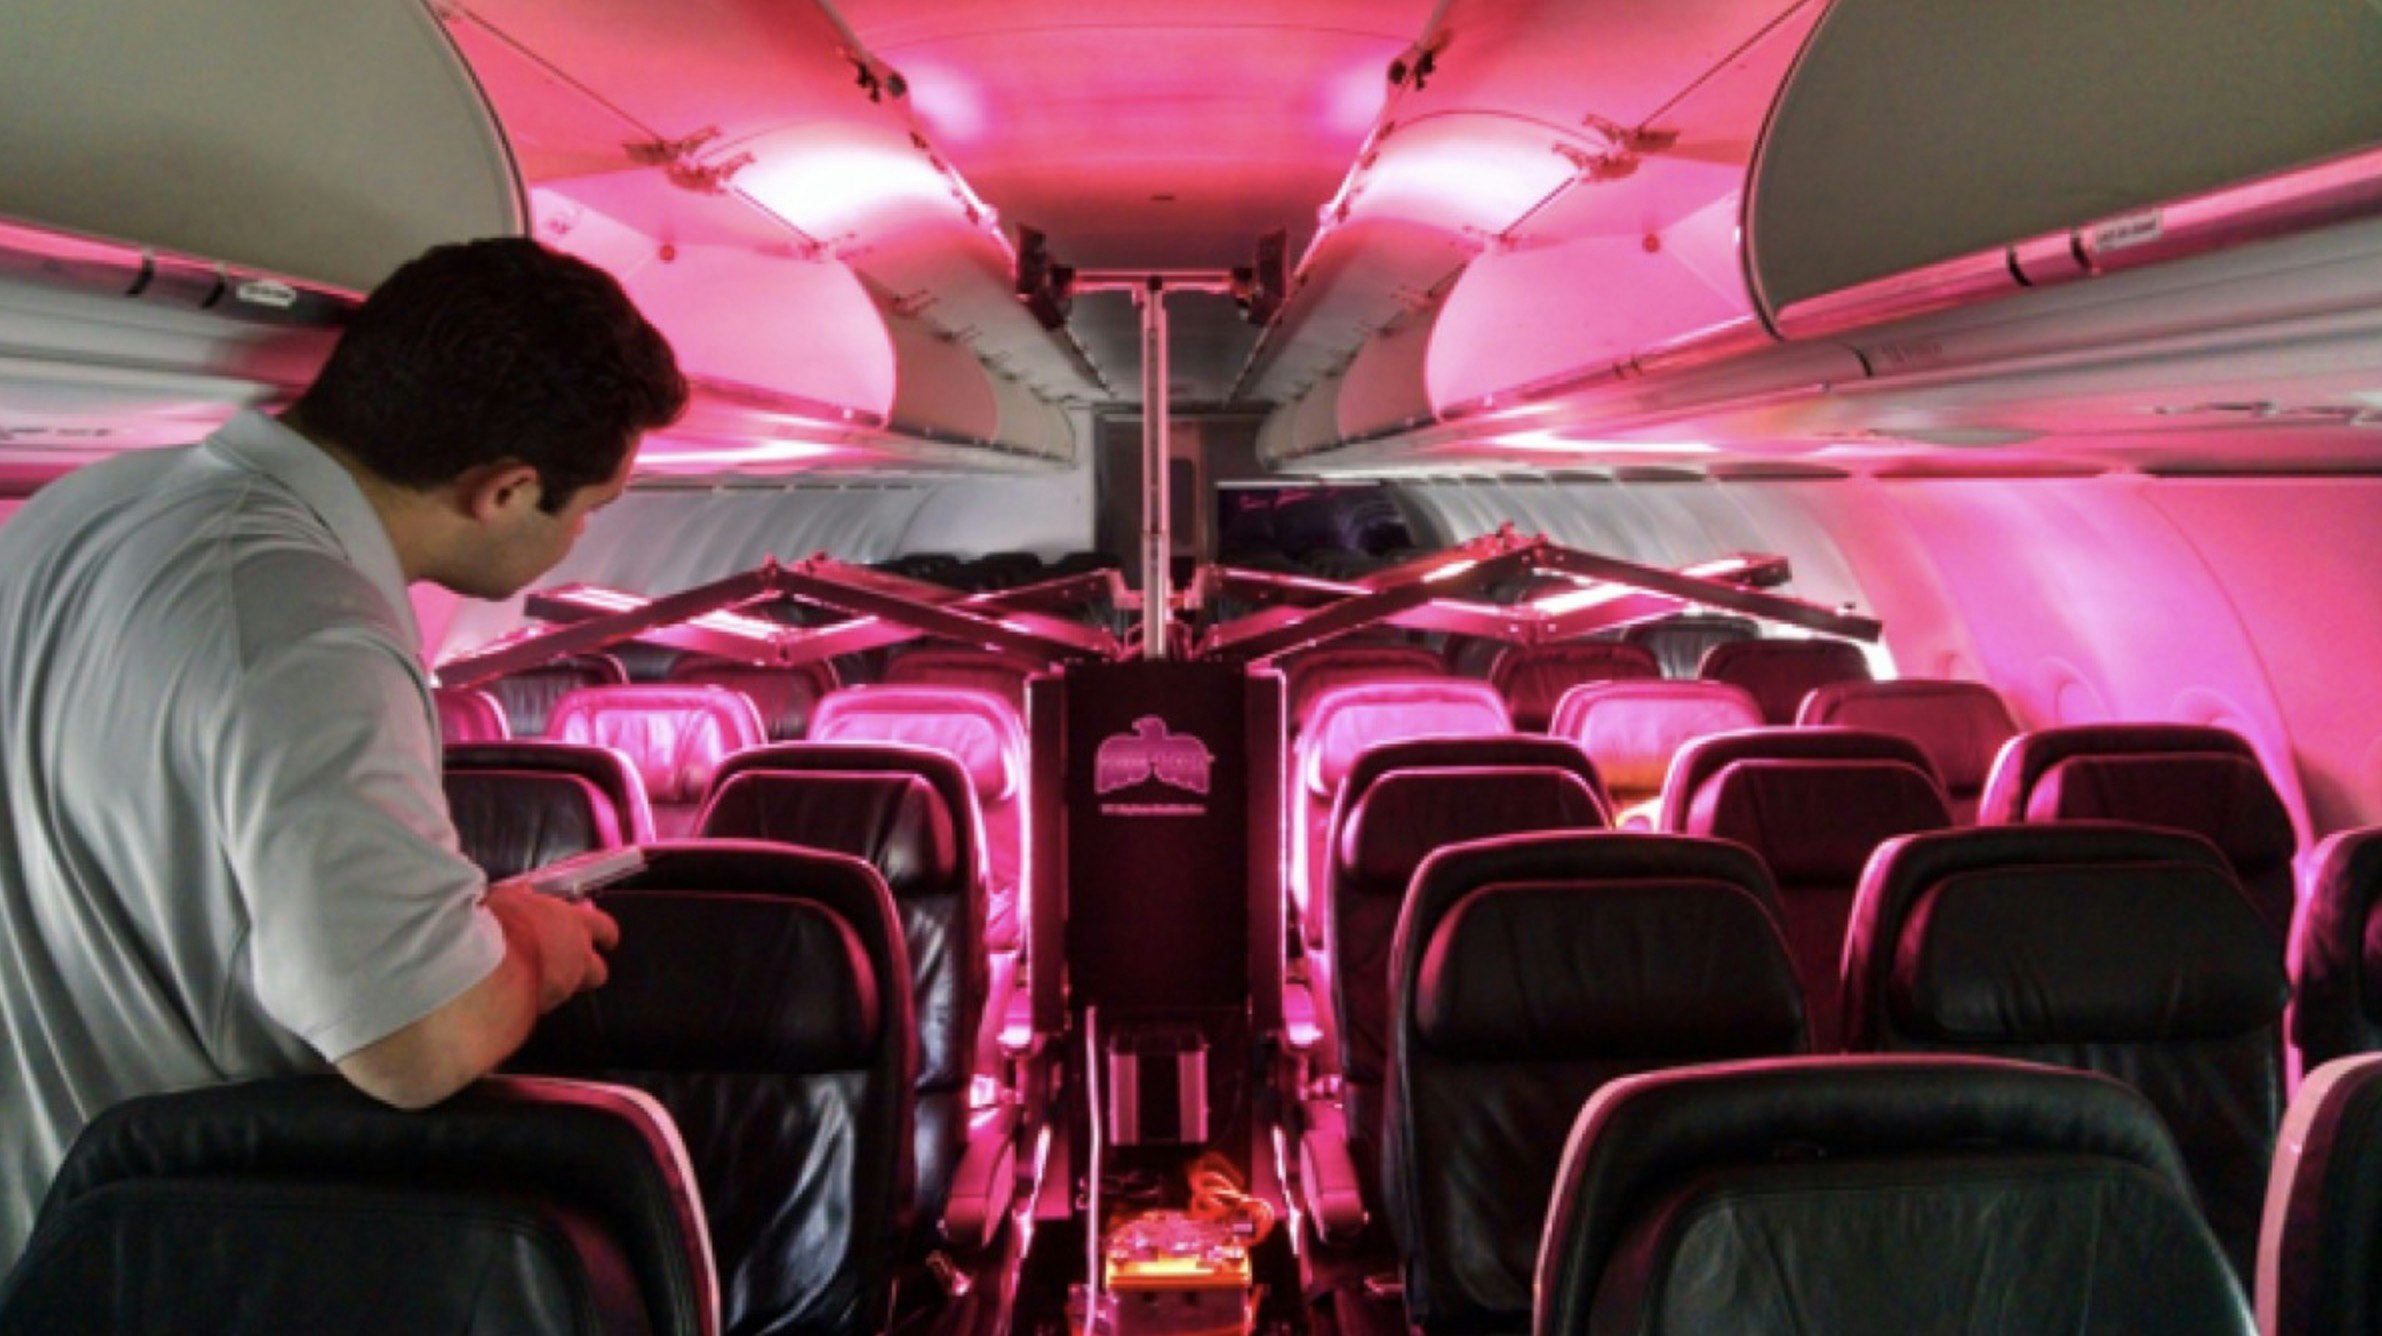 Machine emitting a pink light as it cleans a plane.jpg